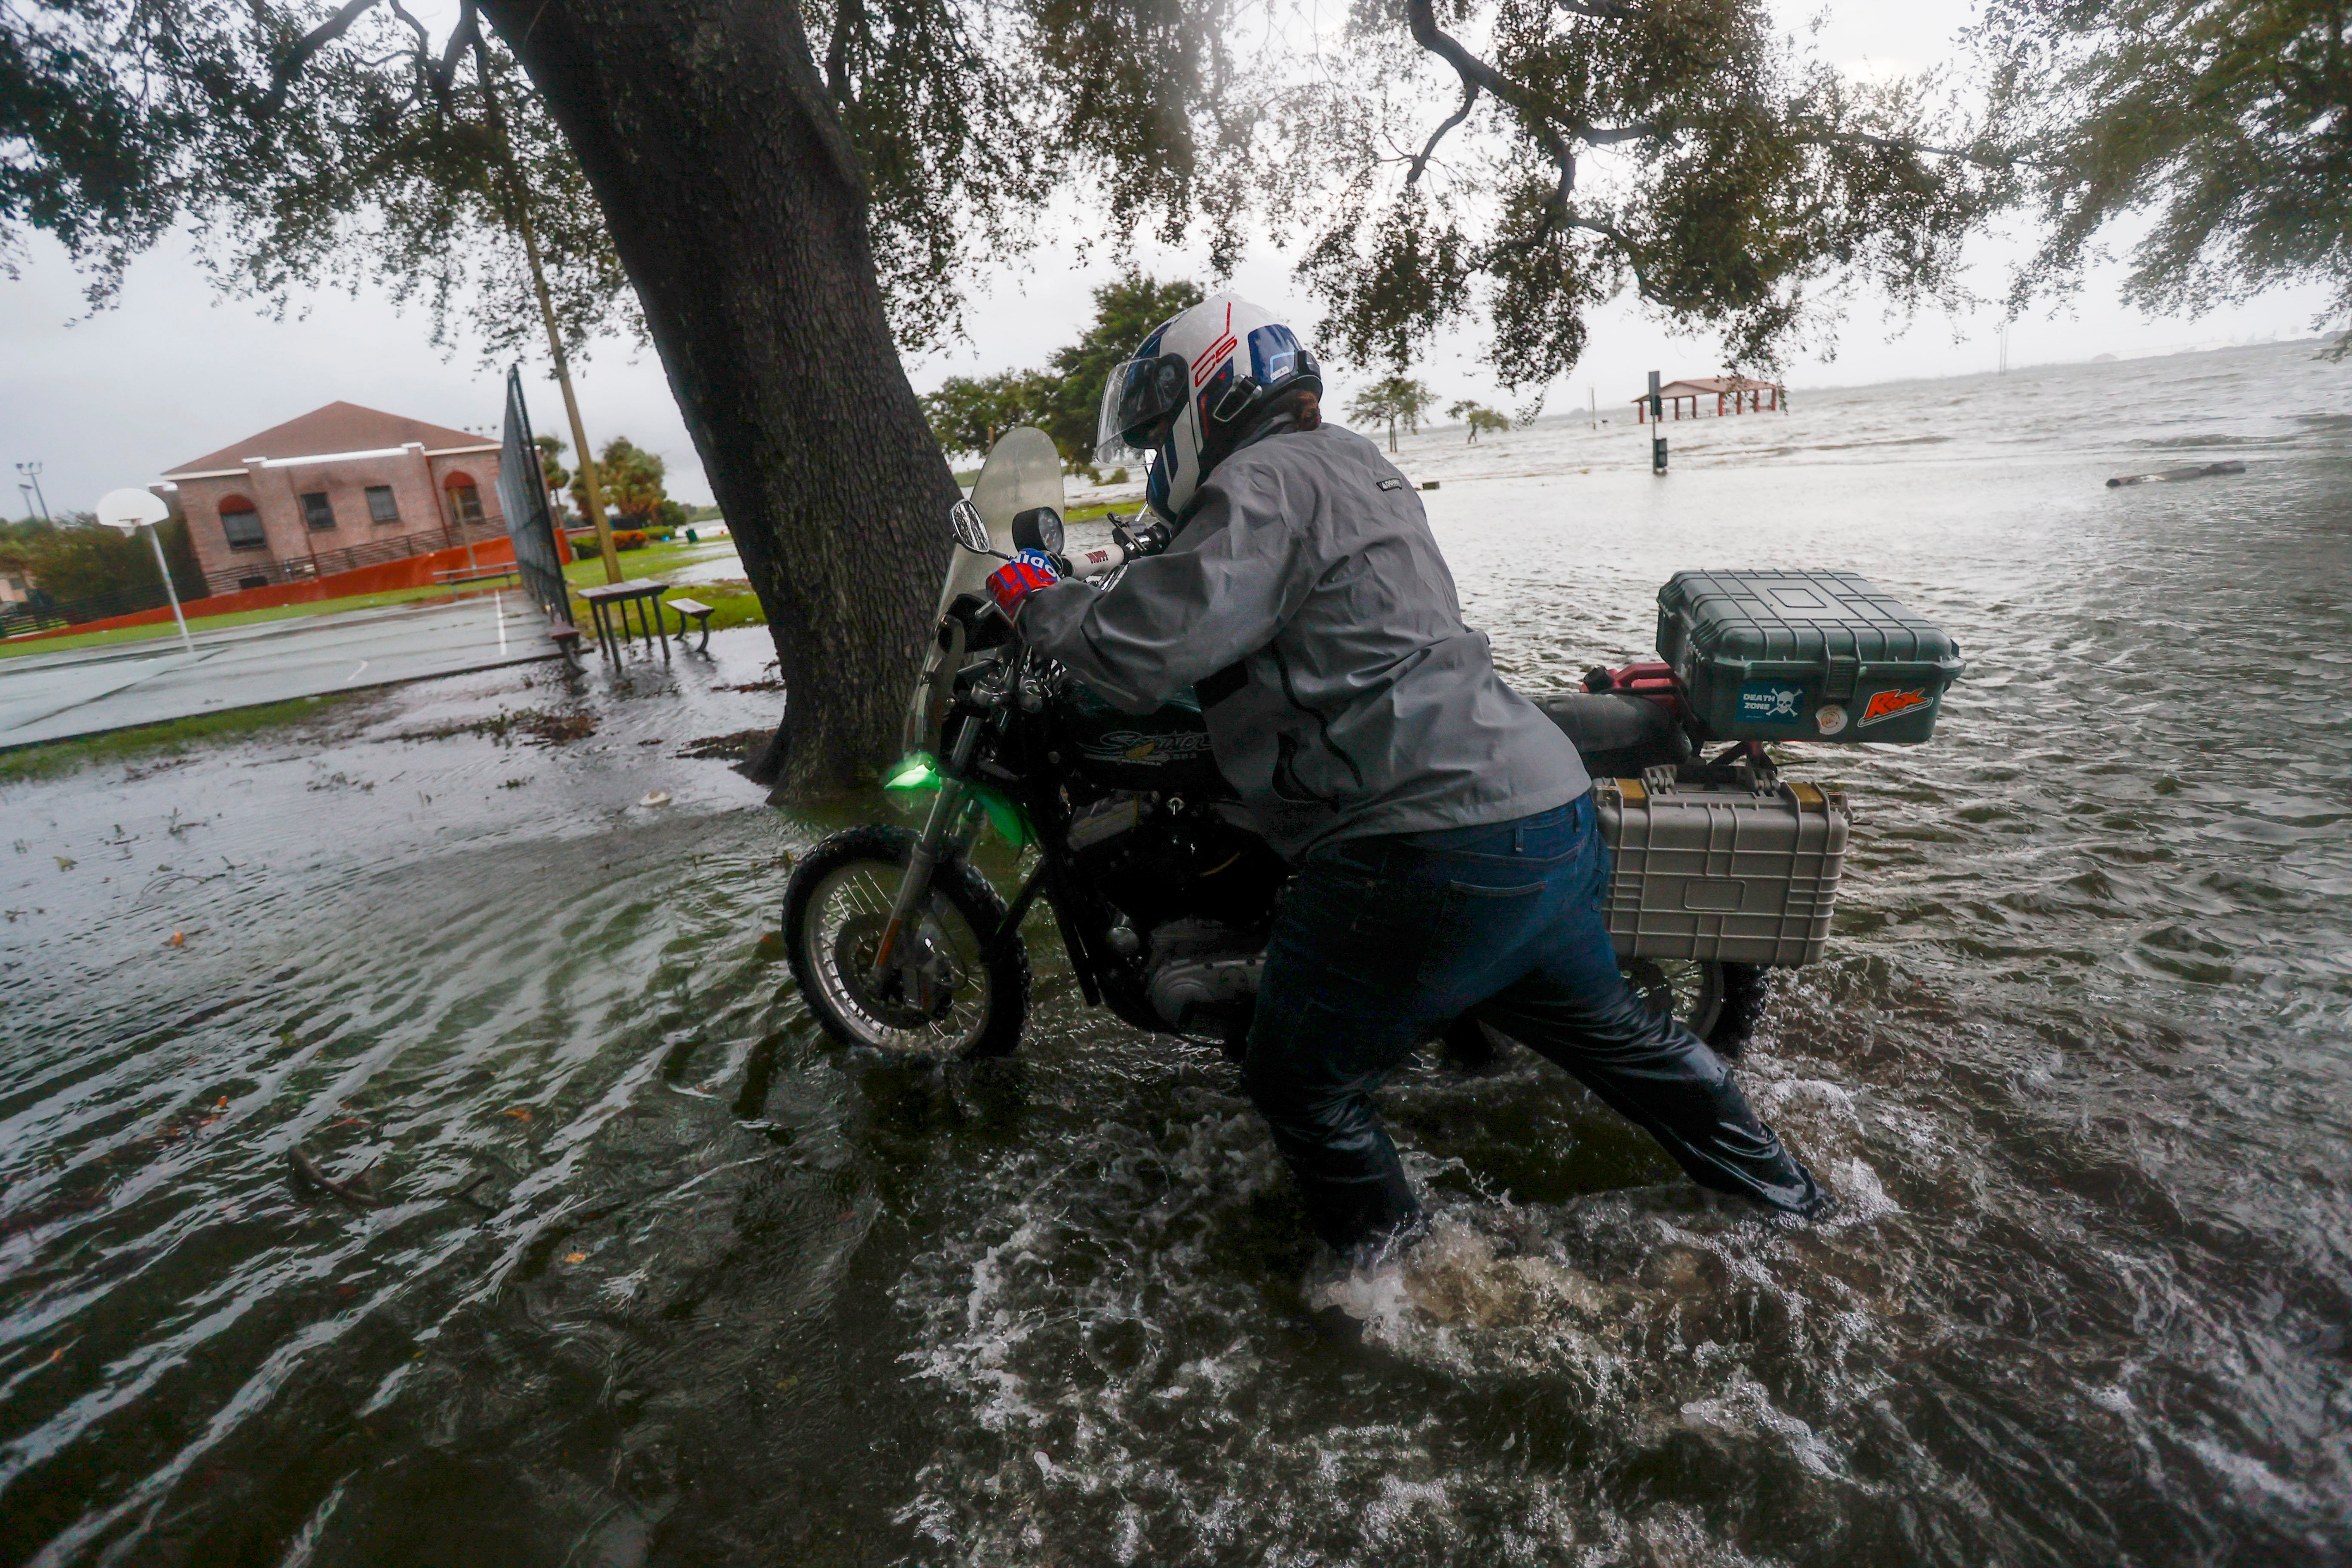 A man walks his motorcycle to Desoto Park after attempting to ride through an impassable South Bermuda Boulevard at Palmetto Beach